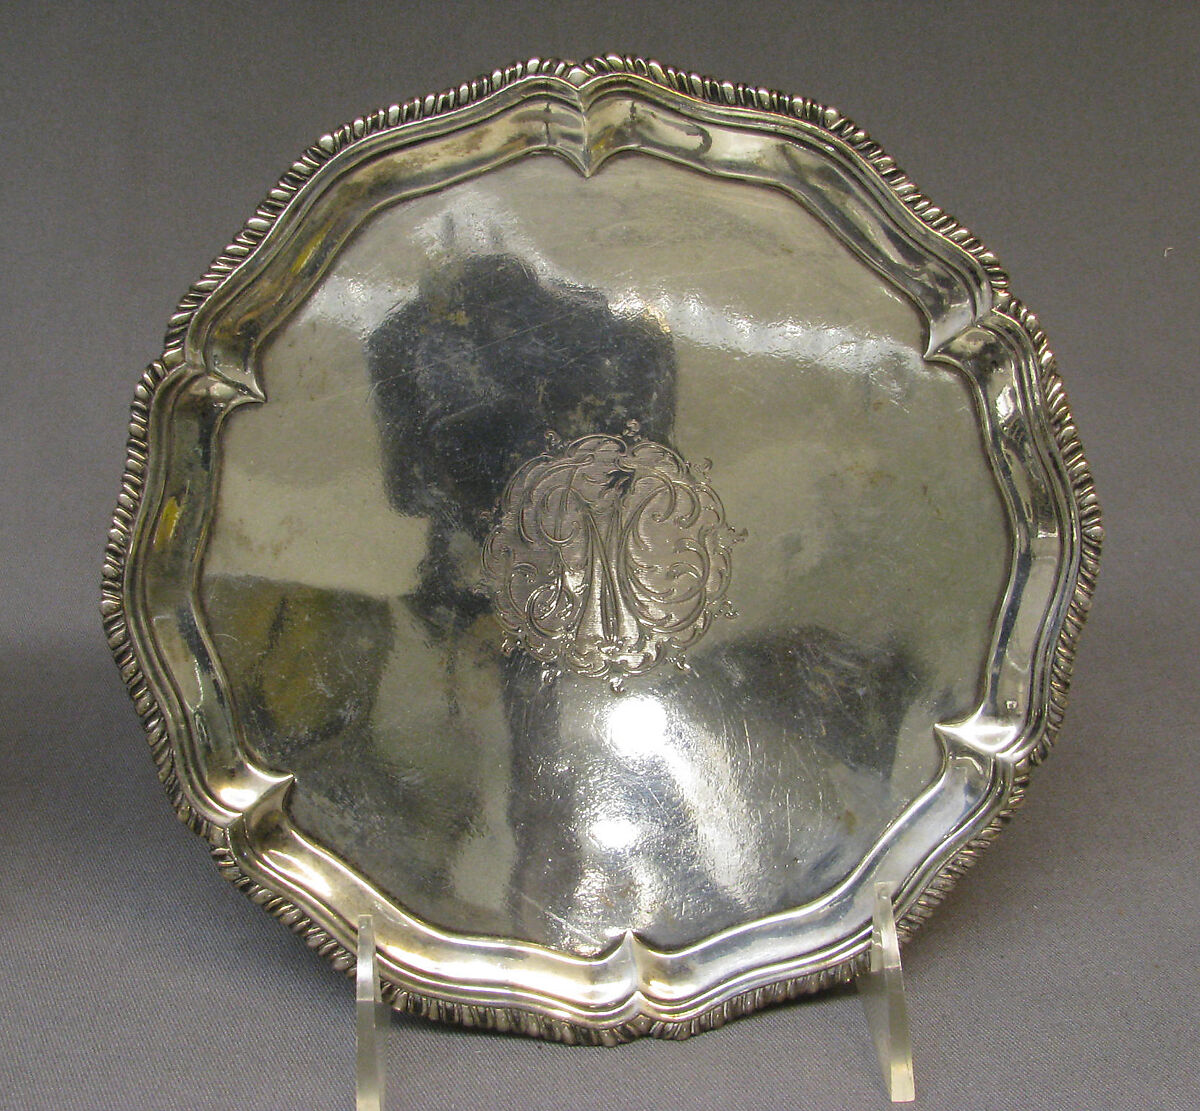 Salver (one of a pair), Probably by Thomas Hannam, Silver, British, London 